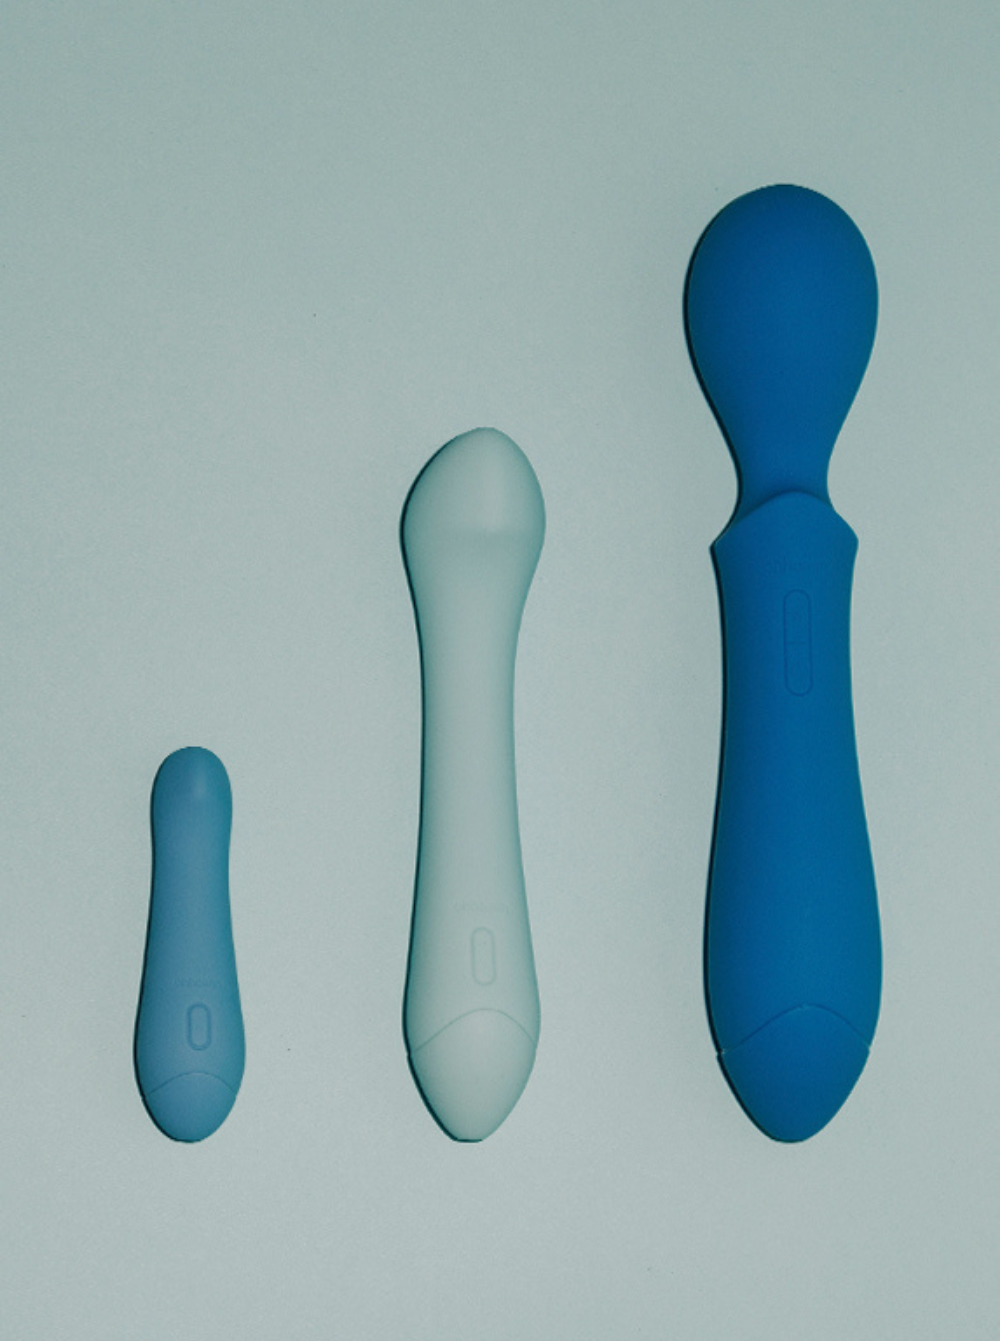 Meet The Worlds First Sex Toy Made From Ocean Plastic Stories Behind Things